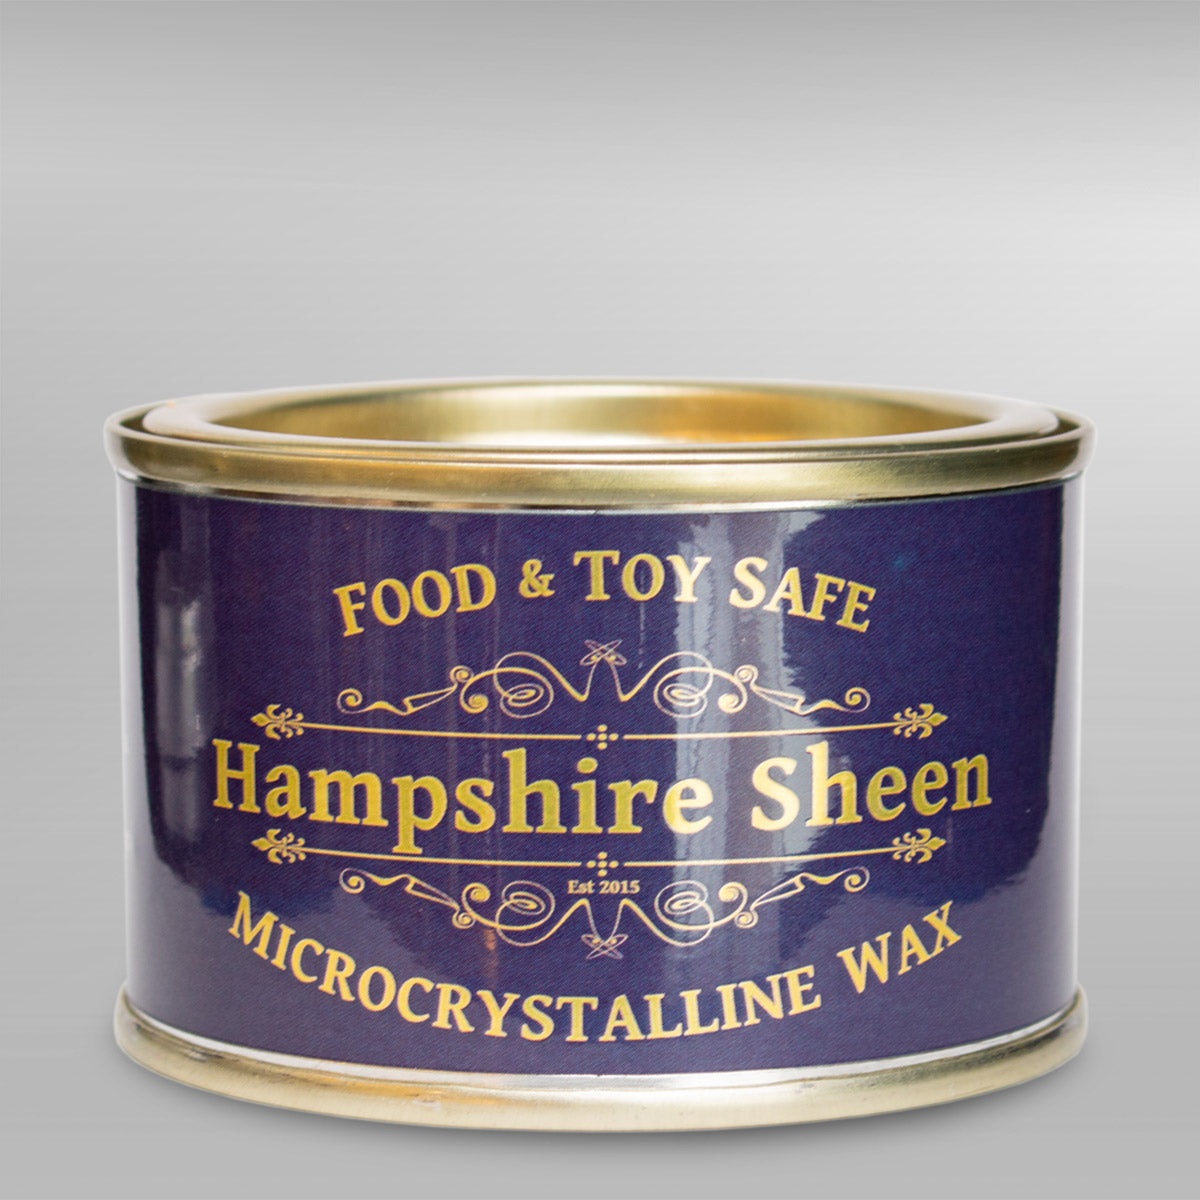 Hampshire Sheen Microcrystalline Wax – The Wooden Products Company